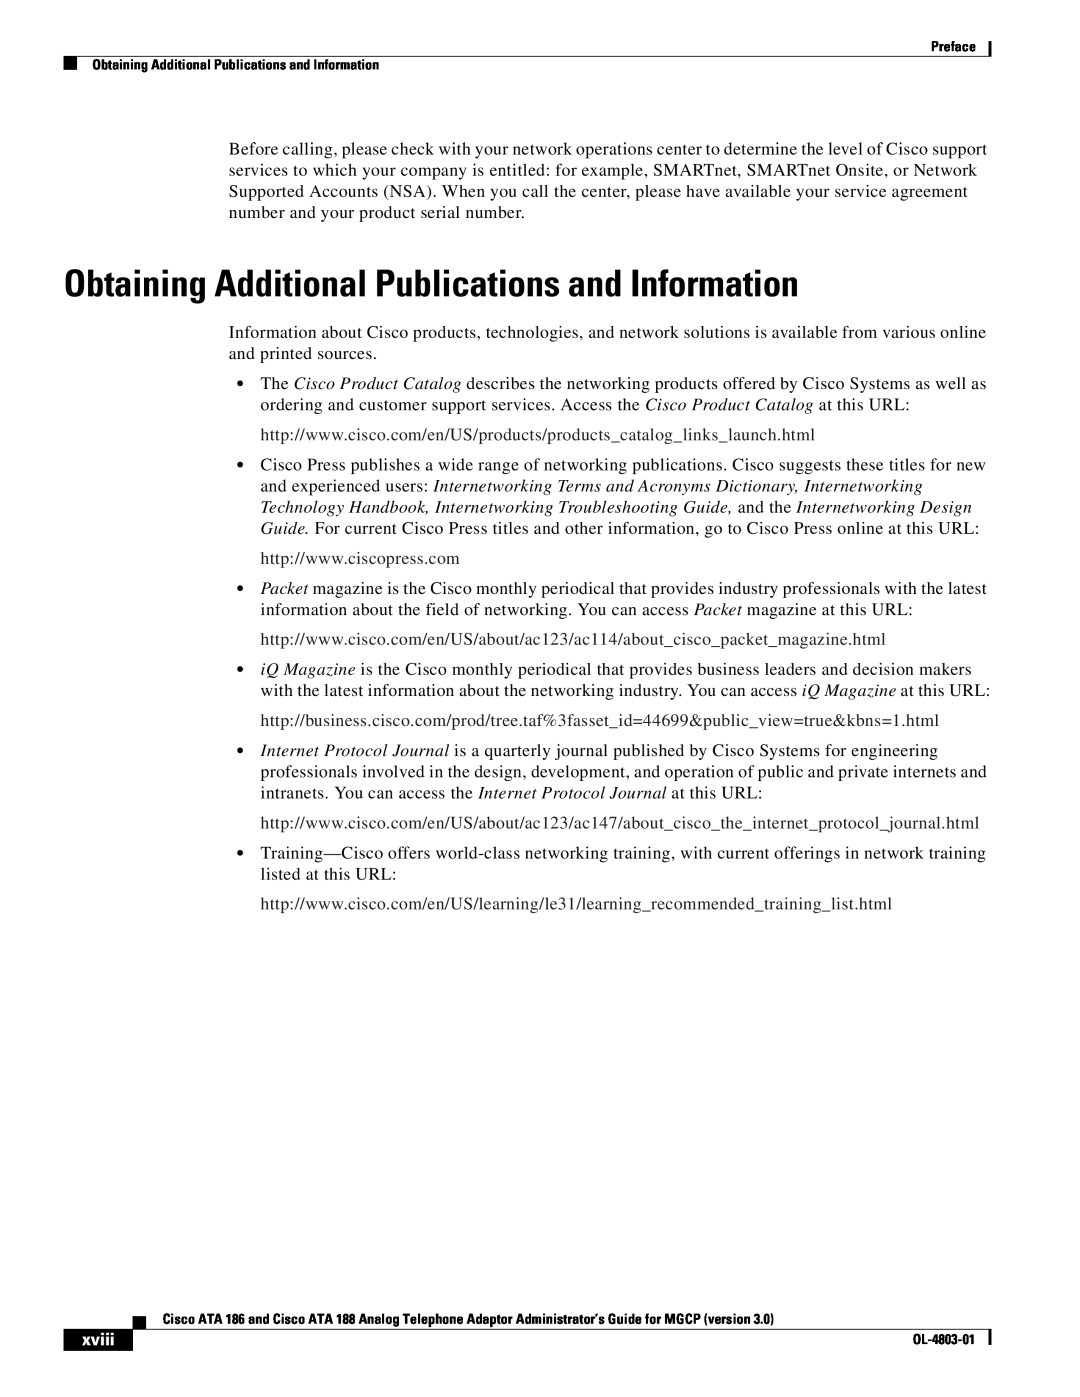 Cisco Systems ATA 186 manual Obtaining Additional Publications and Information, xviii 